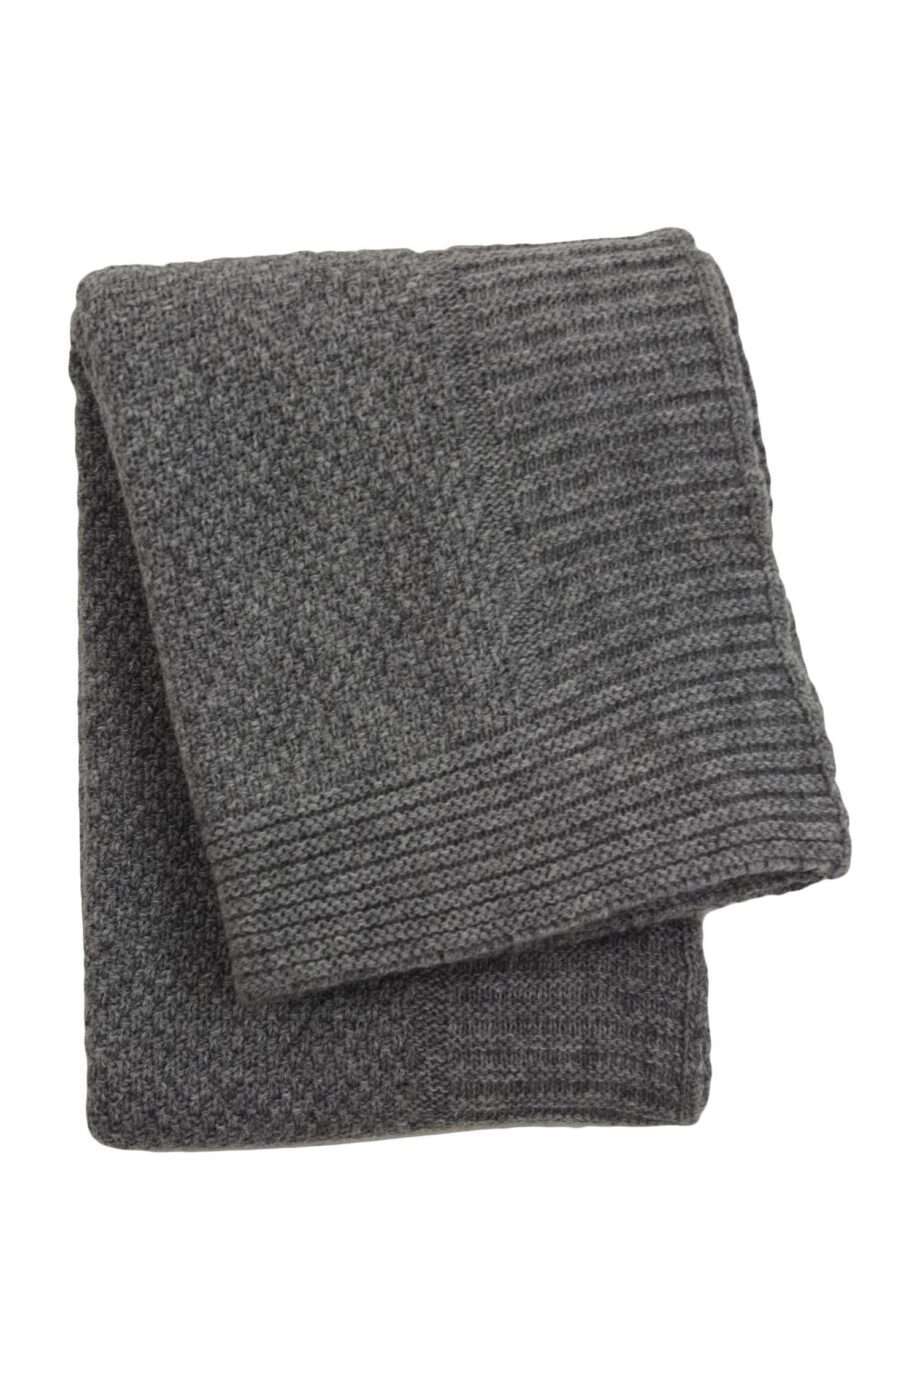 rice grey knitted woolen little blanket small